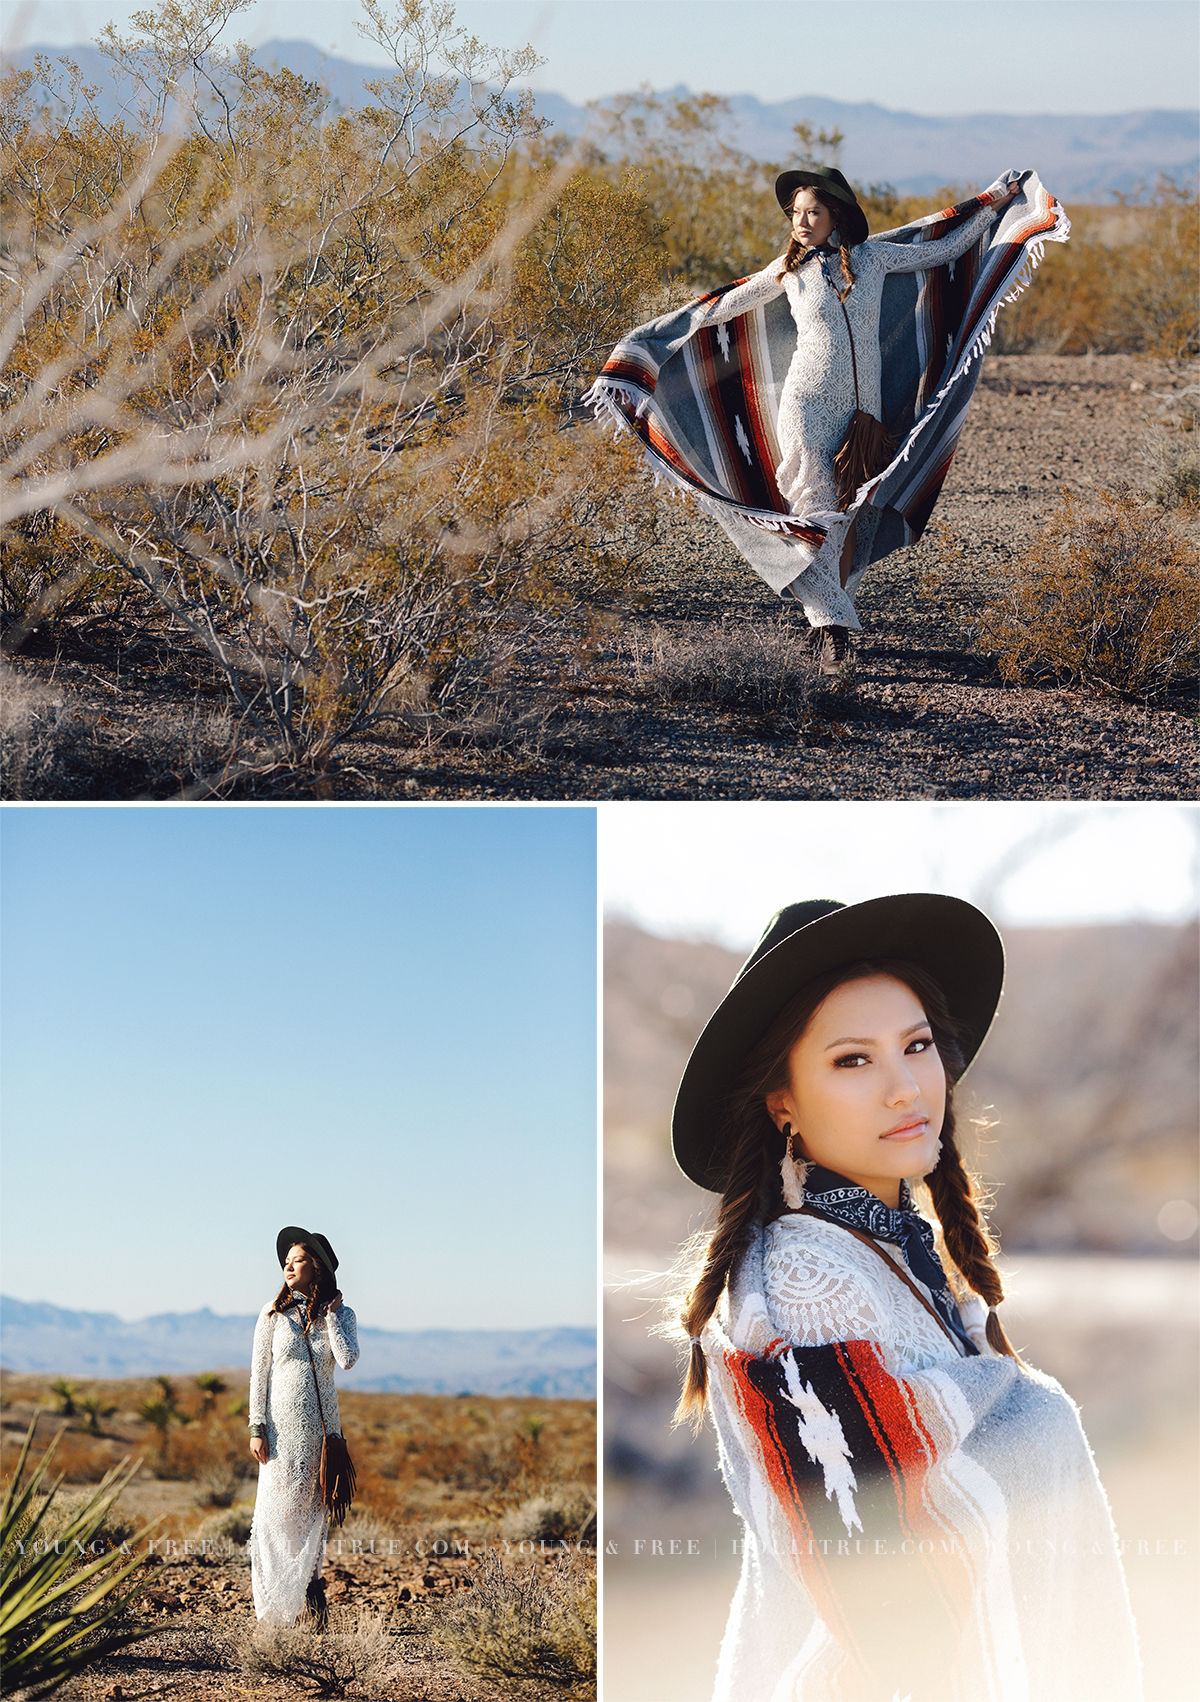 Nelson Ghost Town Senior Portrait Model Session | Deconstructed Shootout in Las Vegas, Nevada | Holli True Photography | Stylish Senior Photography in a desert location